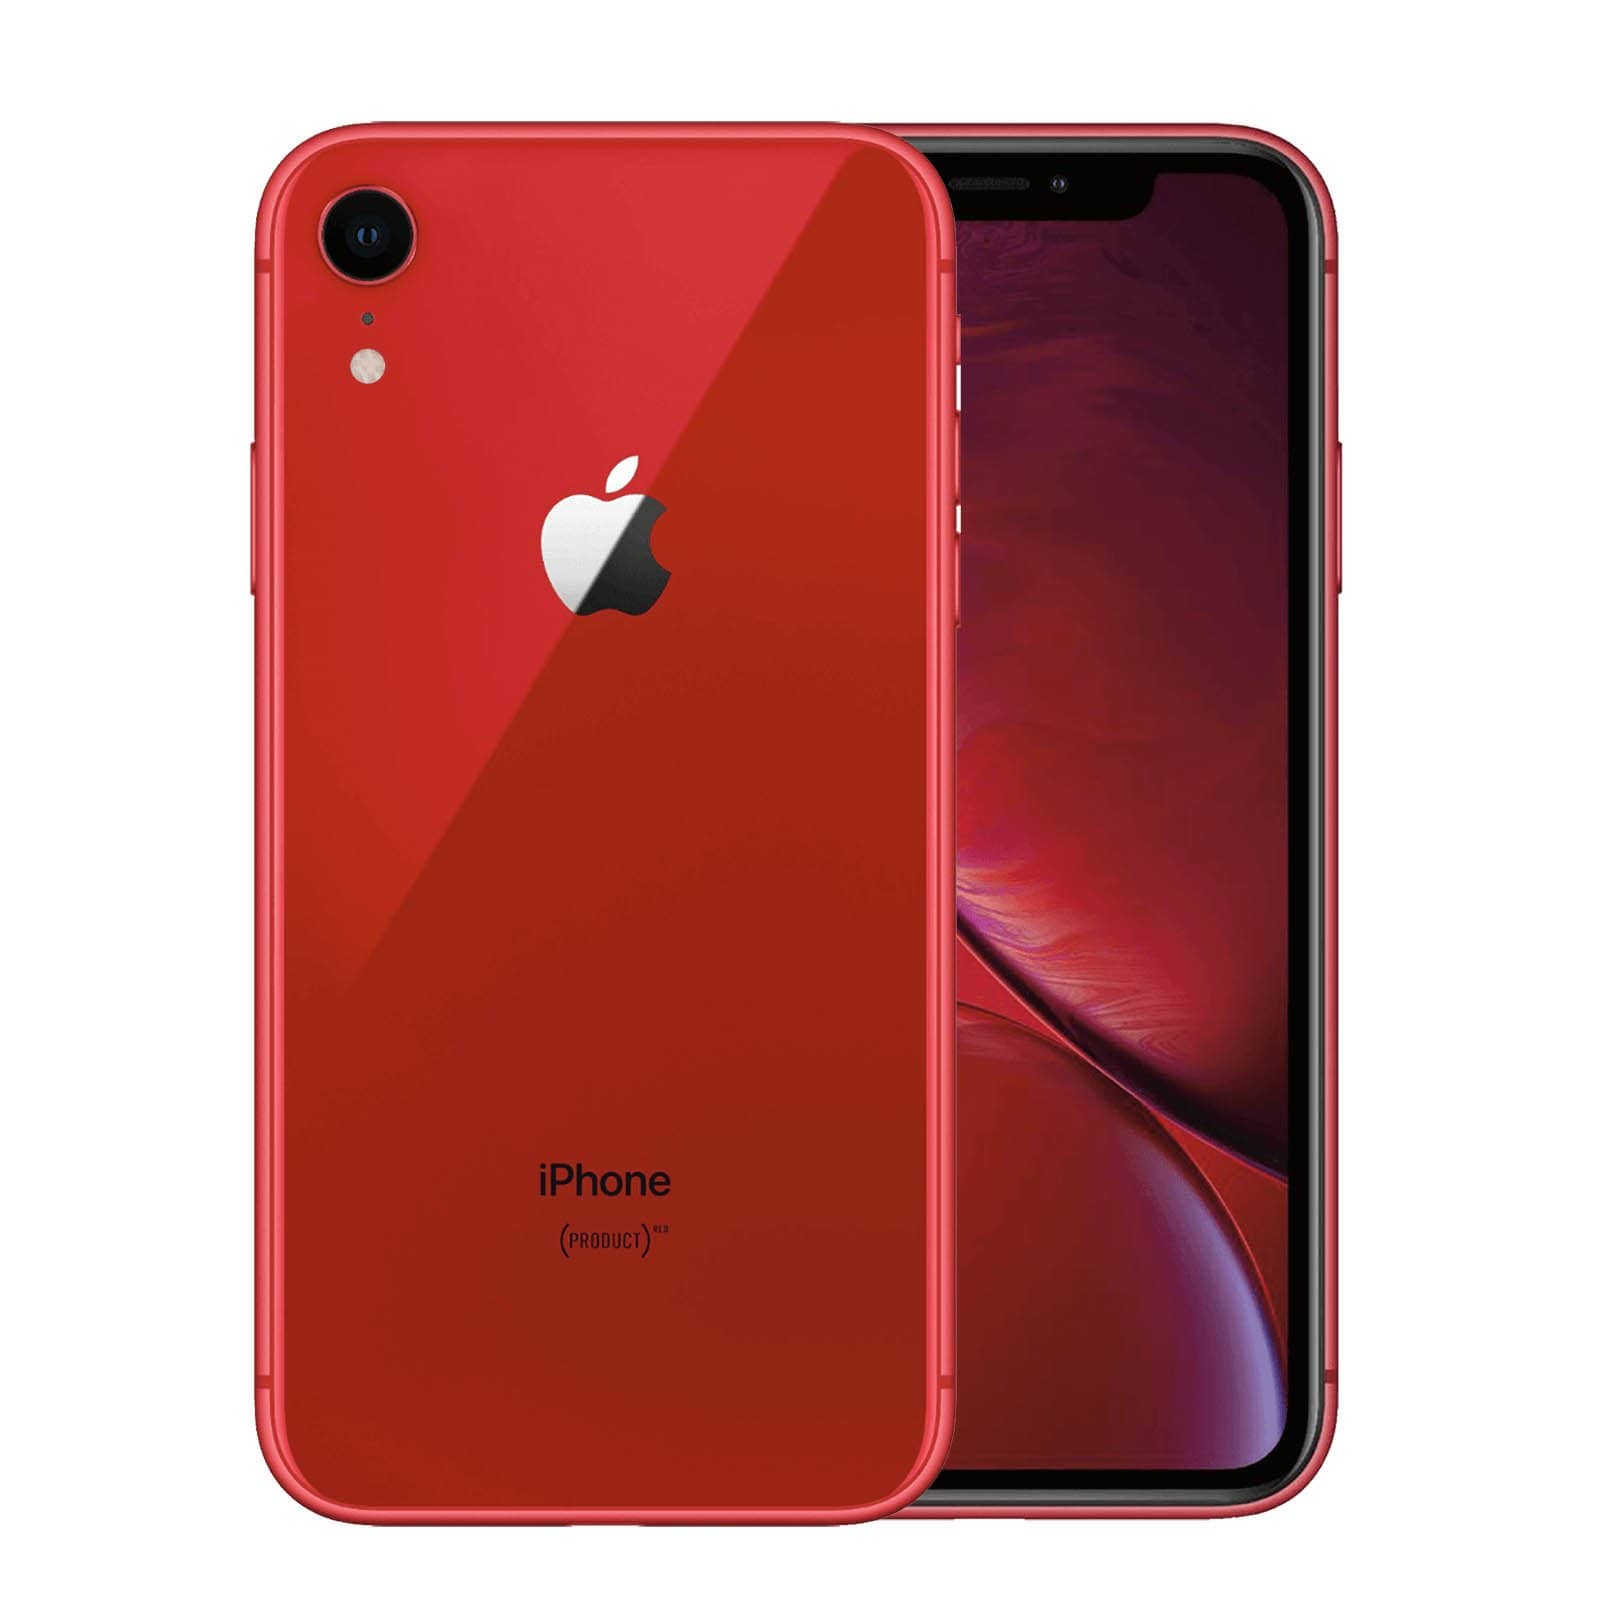 Apple iPhone XR 128GB Product Red Pristine - Unlocked 128GB Product Red Pristine